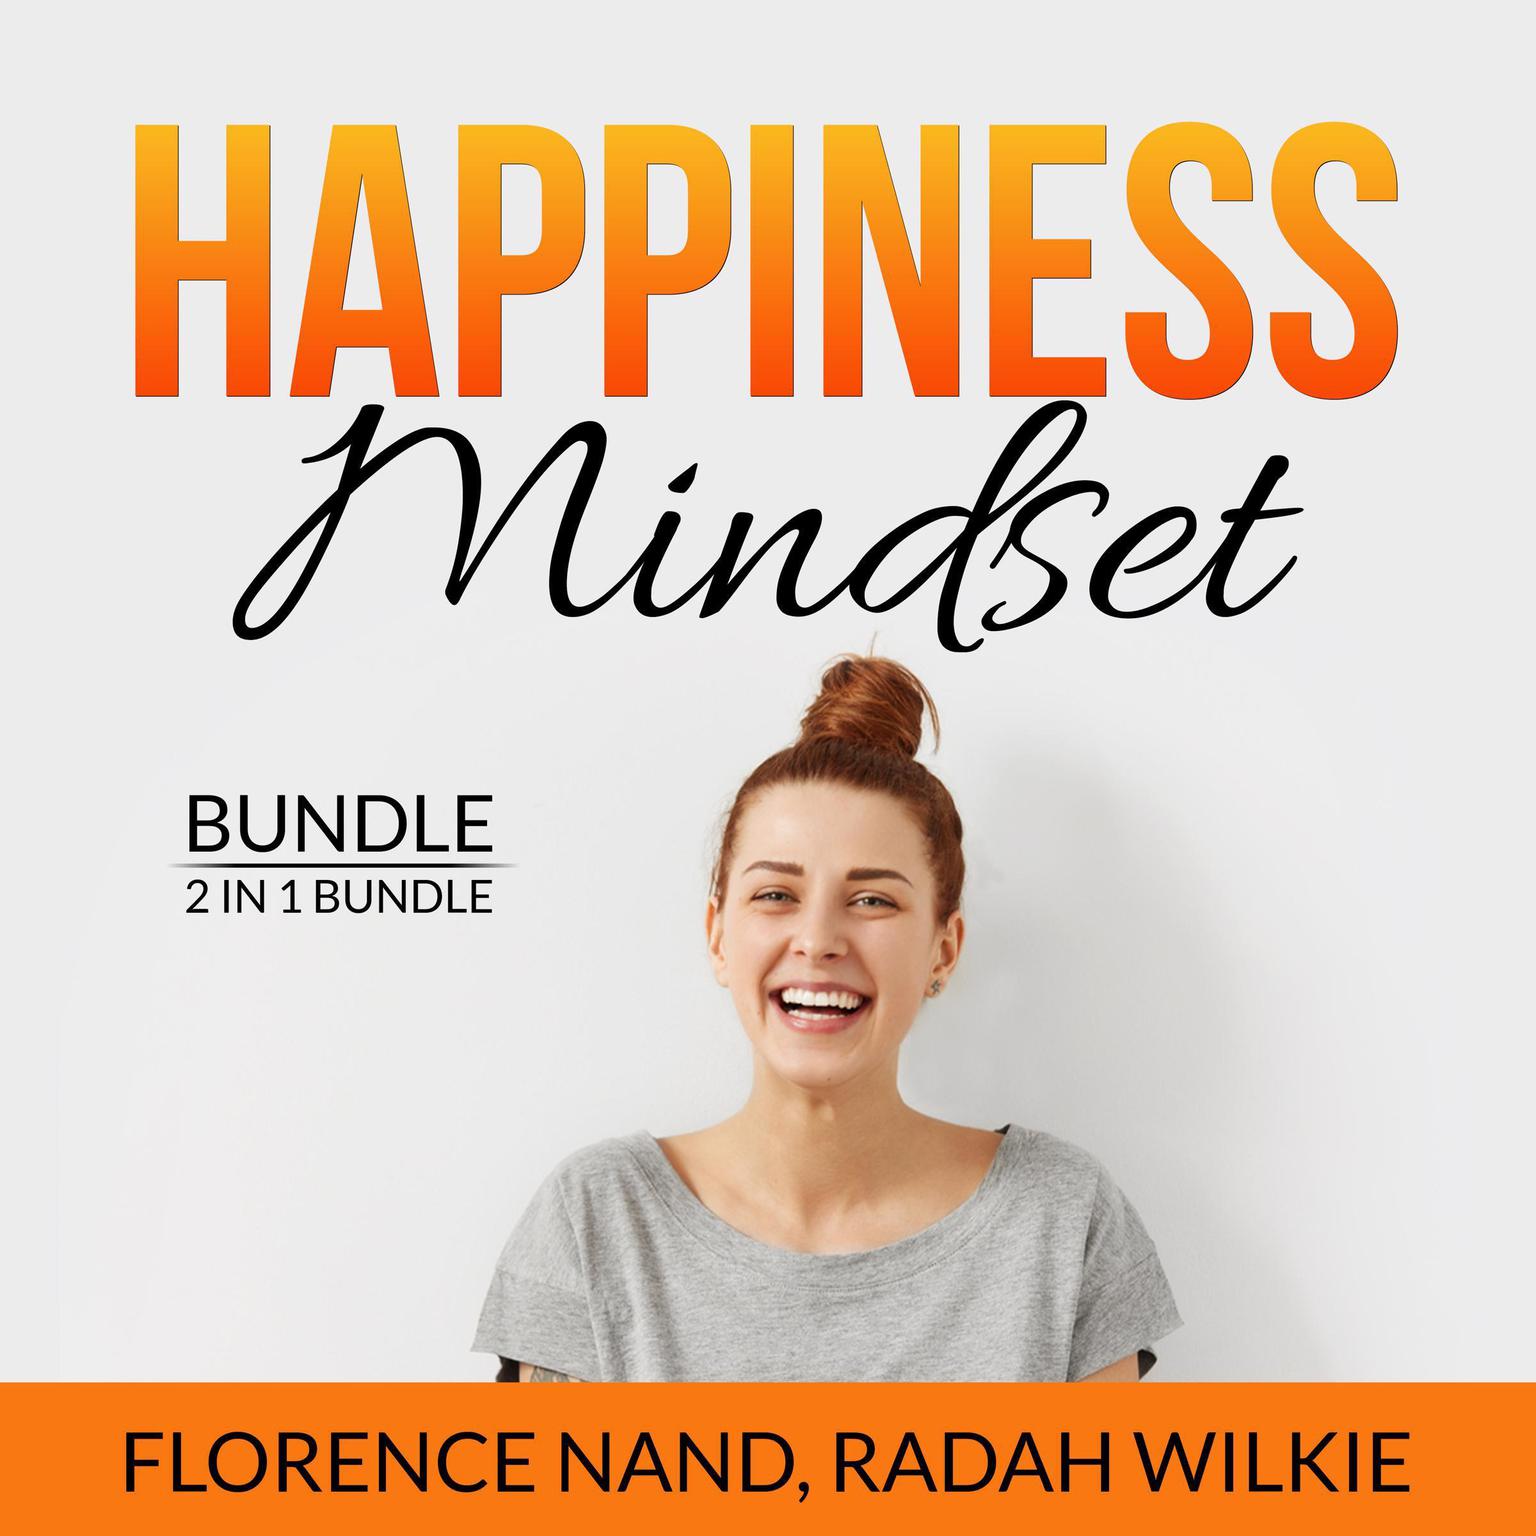 Happiness Mindset Bundle, 2 in 1 Bundle: Happy Inside, Happy by Design Audiobook, by Florence Nand